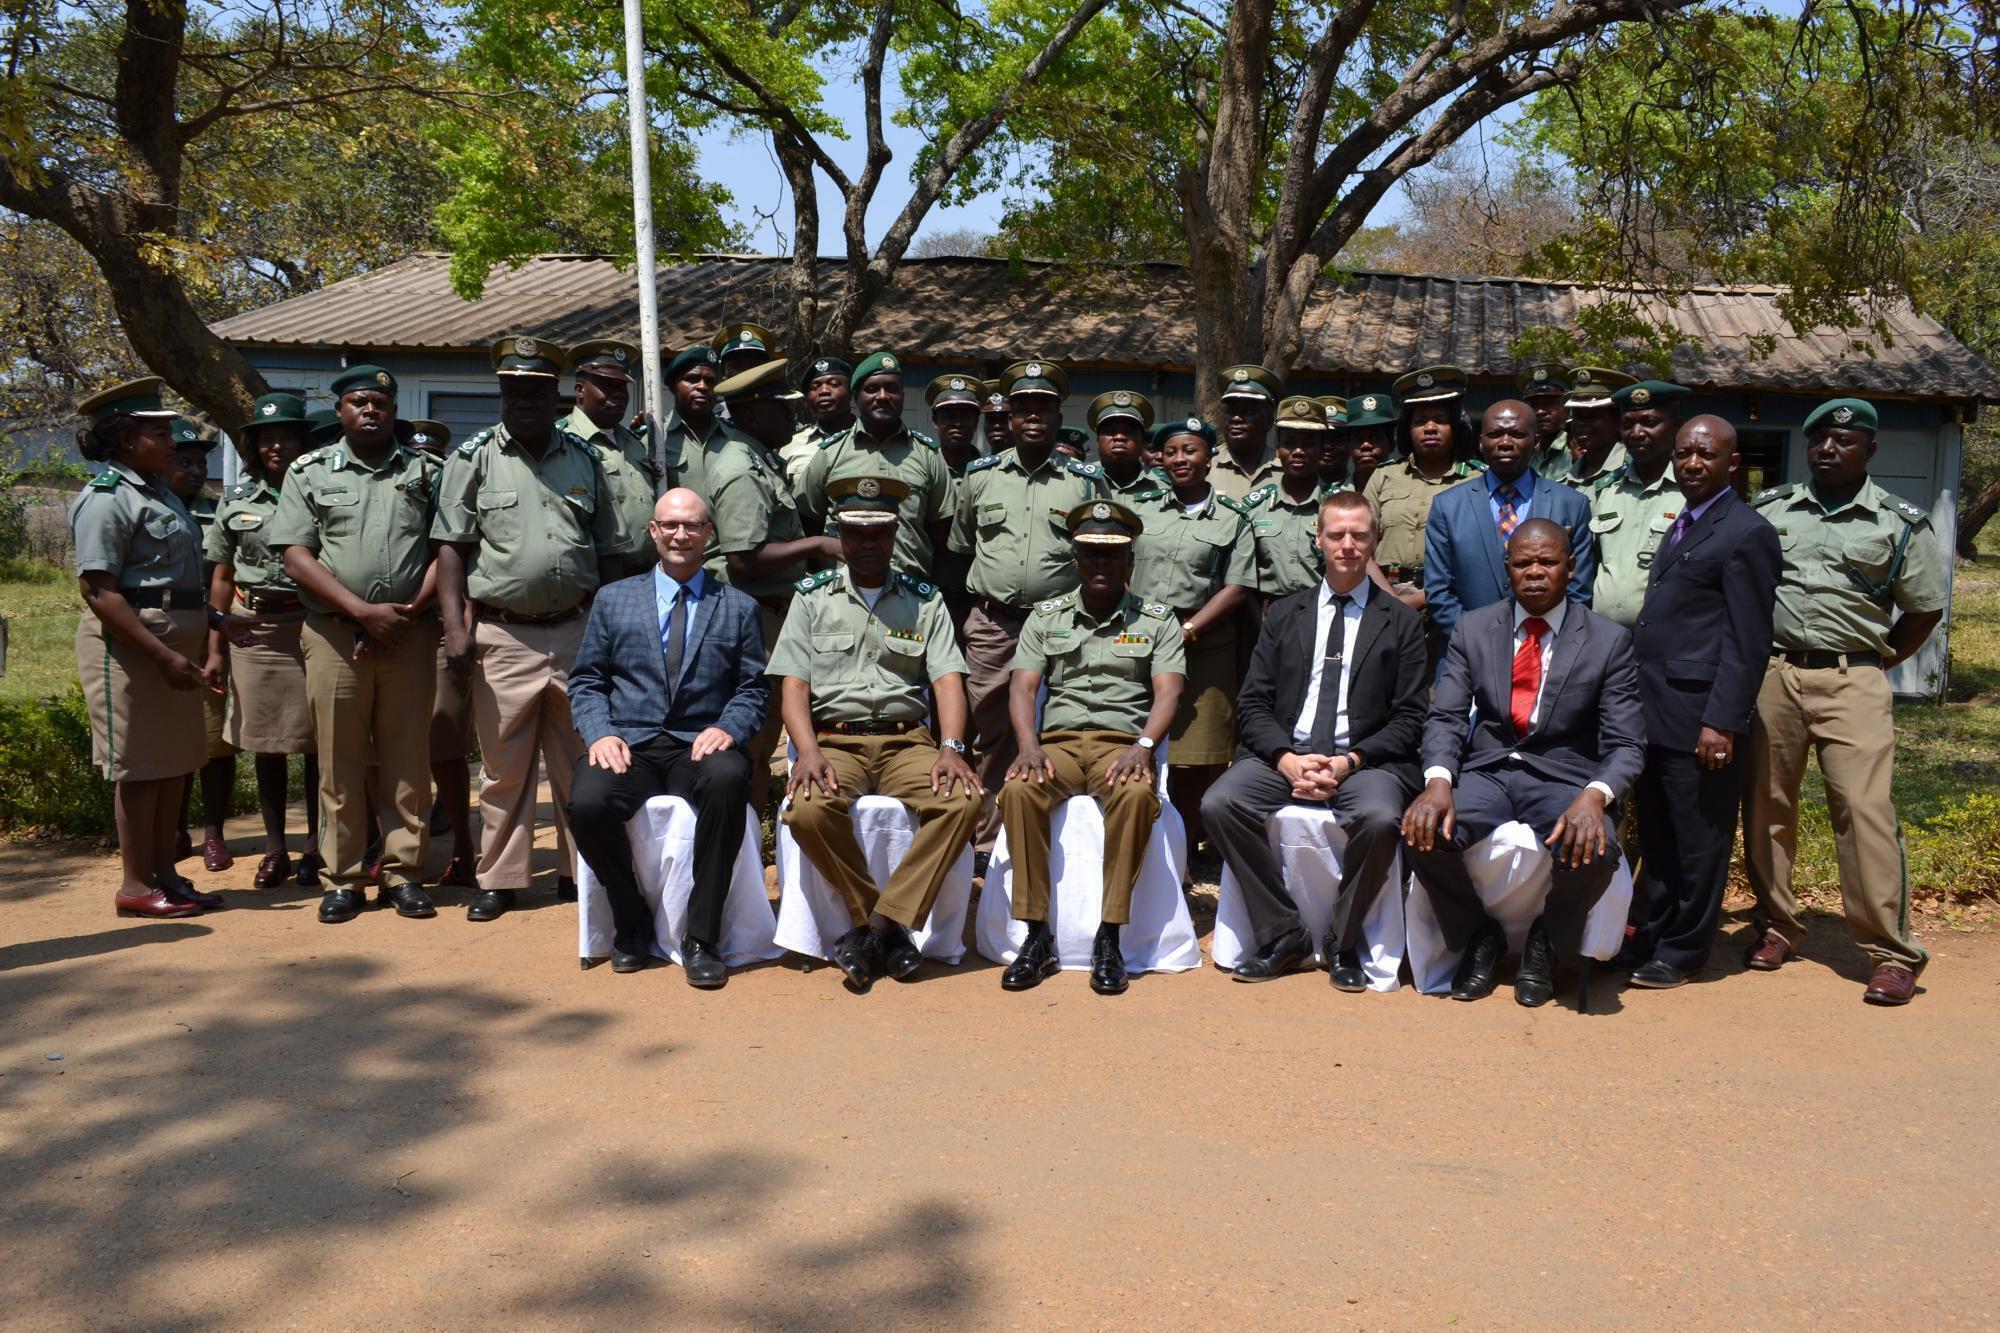 A group of Zambian correctional officers pose for a photo with visitors from Canada.